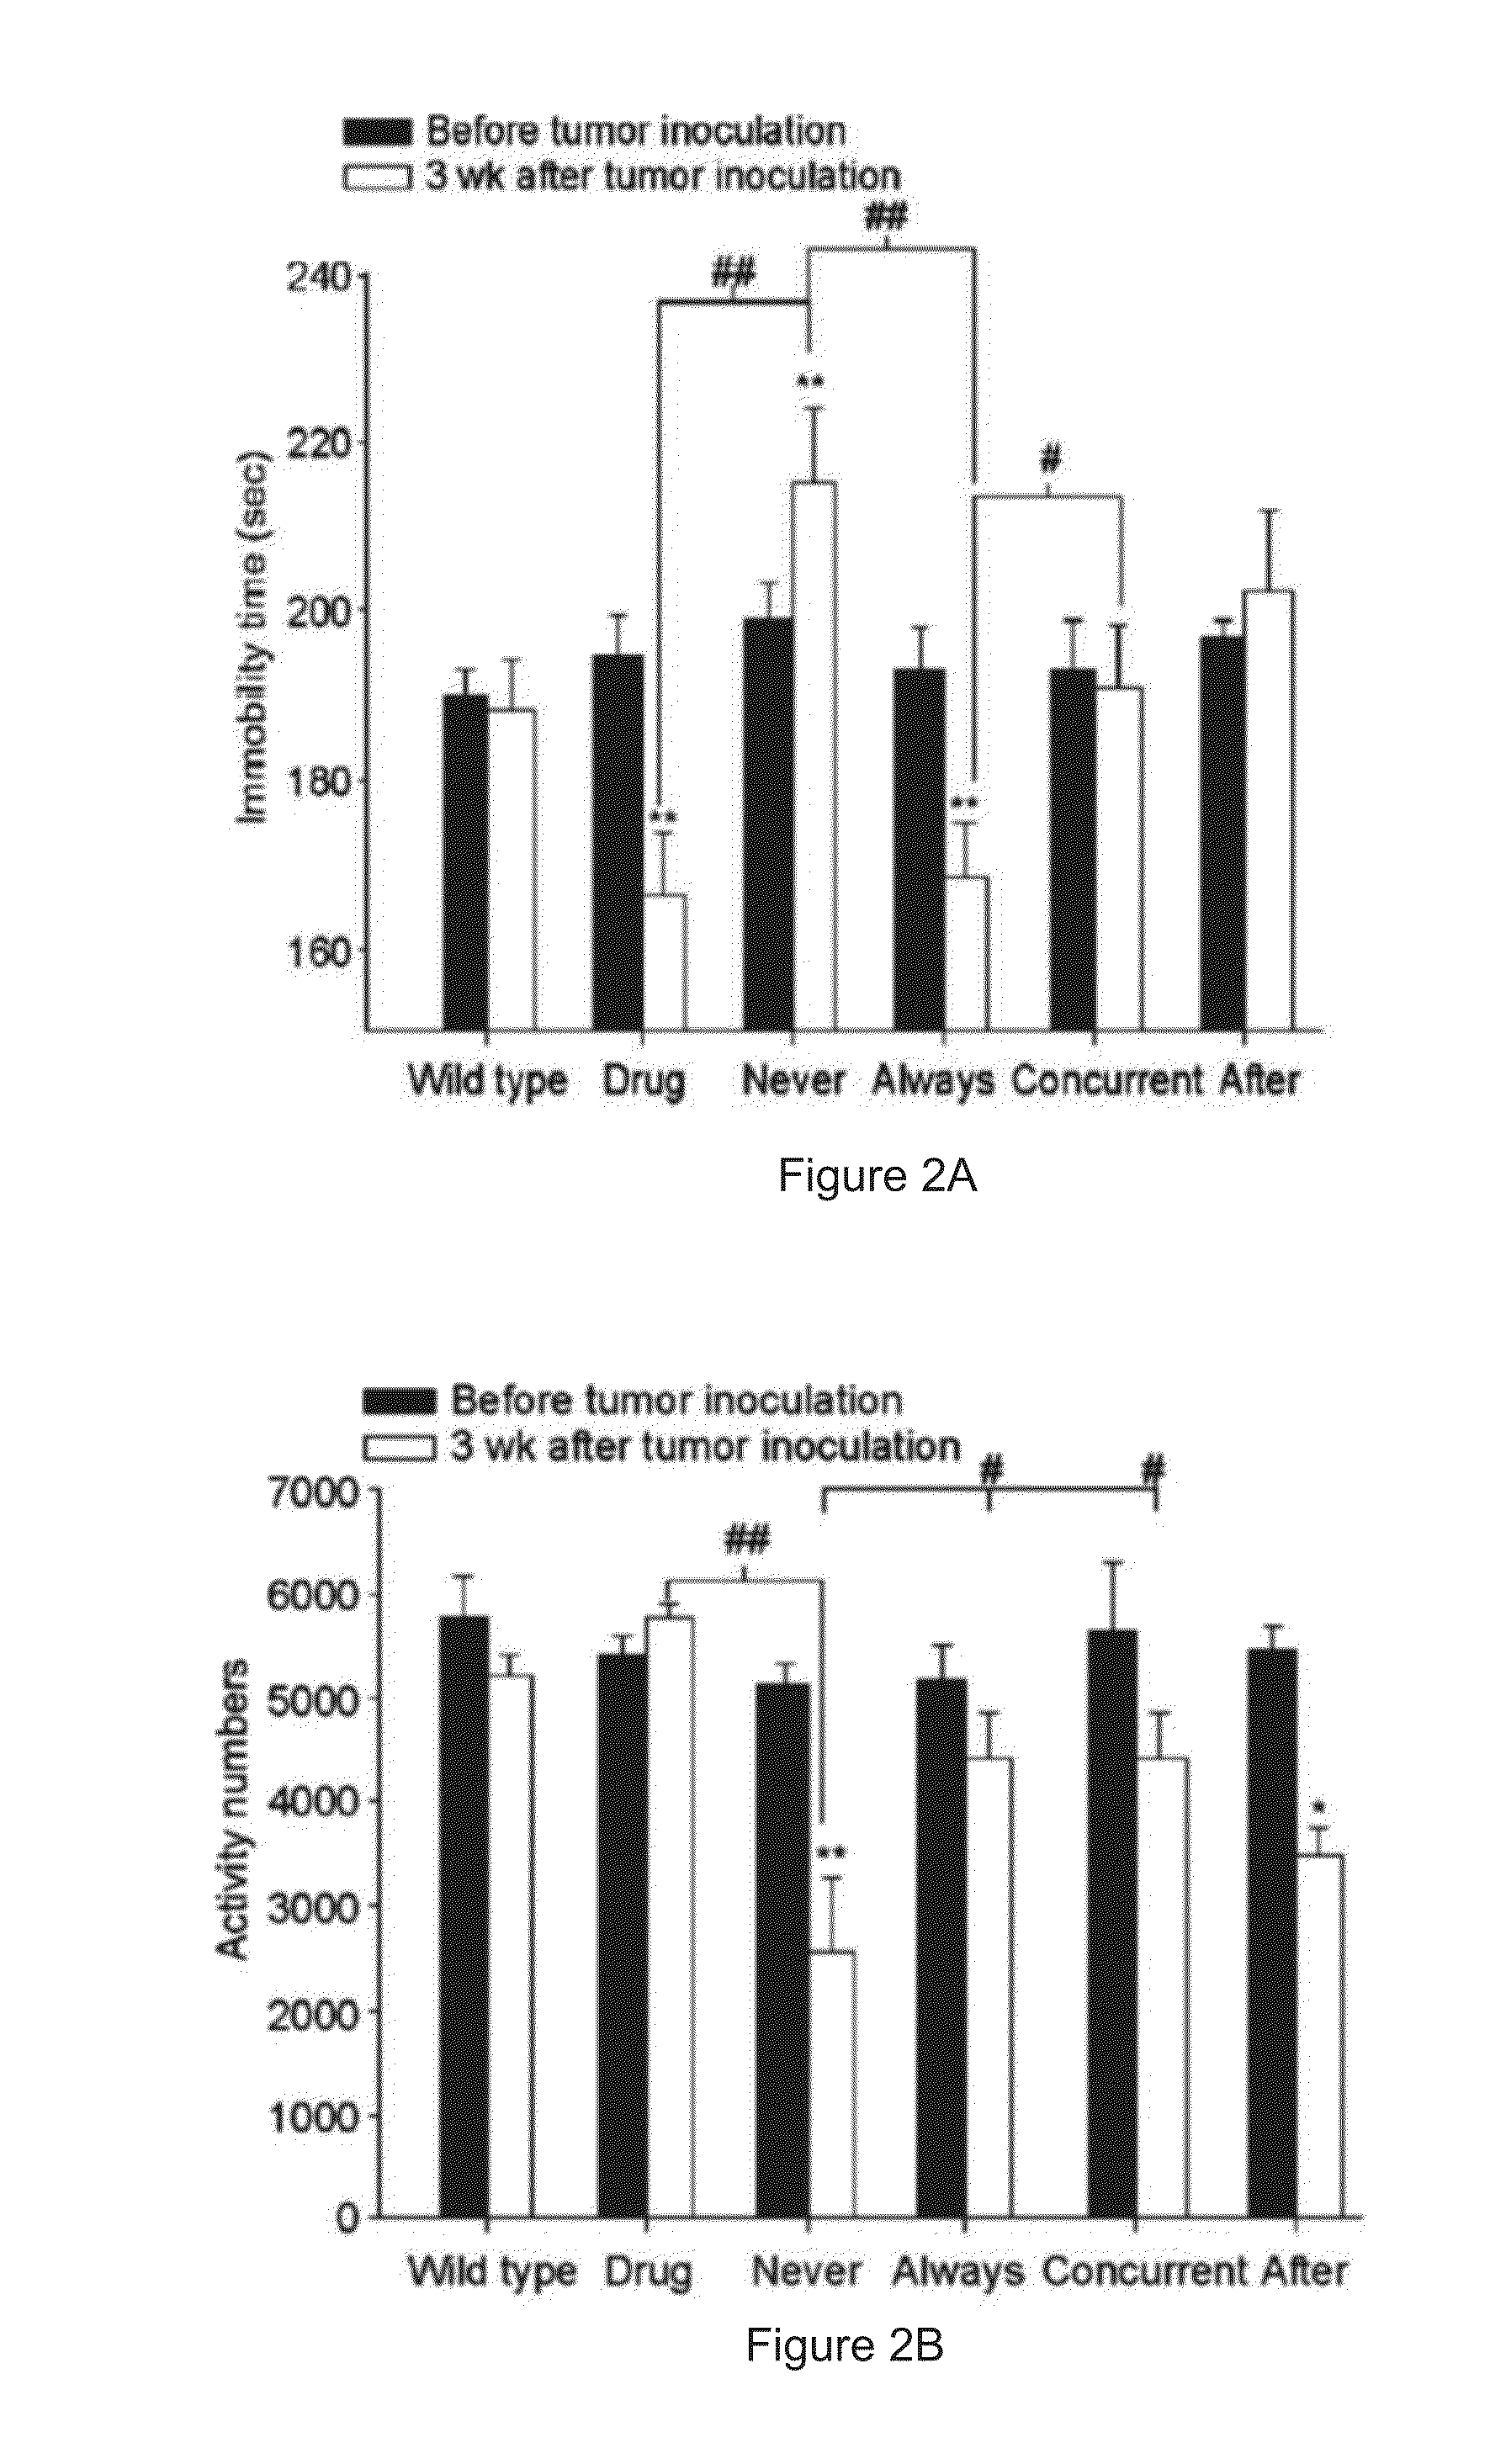 Method of using an antidepressant for increasing immunity of a subject and treating cancer